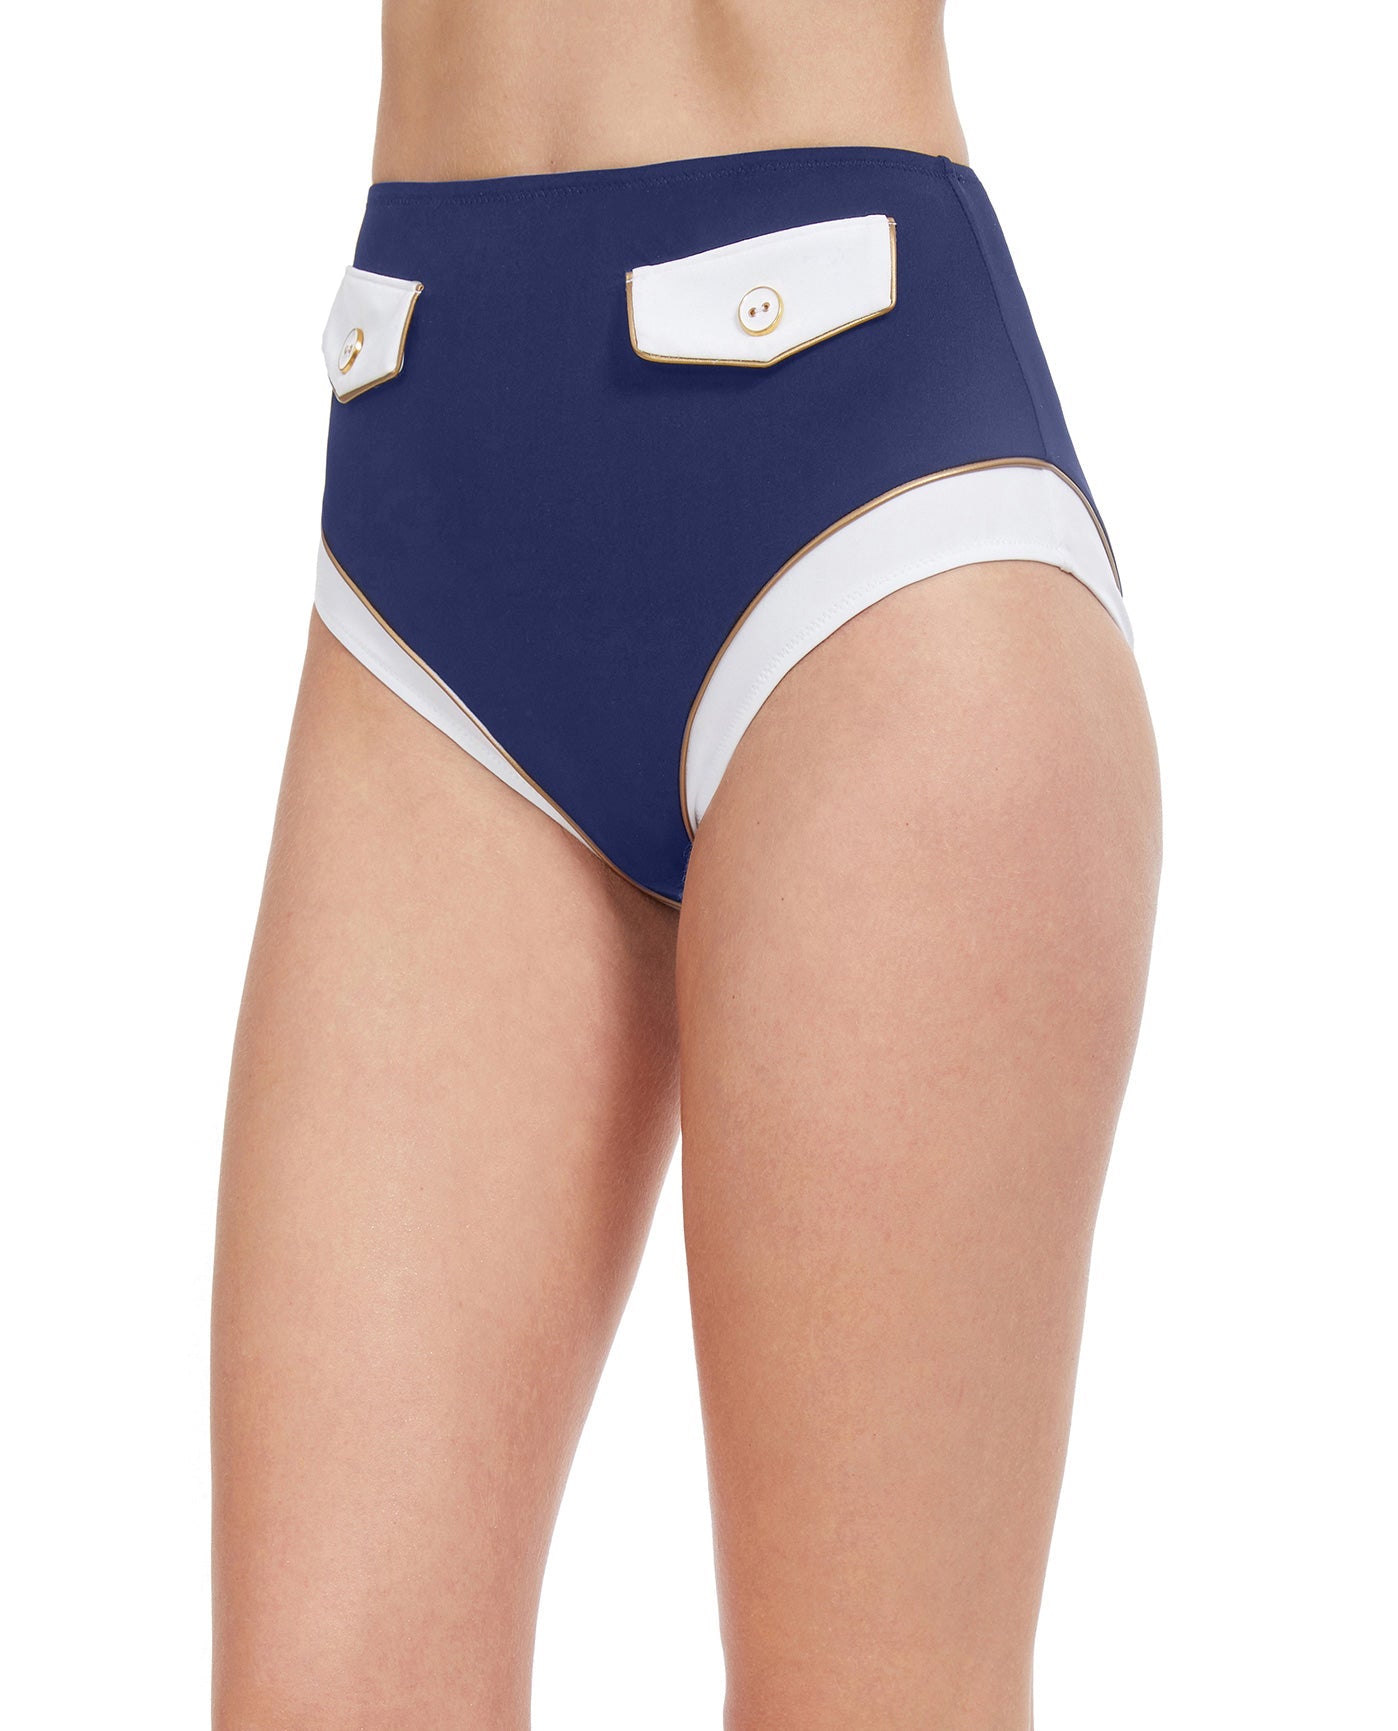 Side View View Of Gottex Classic High Class Pocketed High Waist Bikini Bottom | Gottex High Class Navy And White